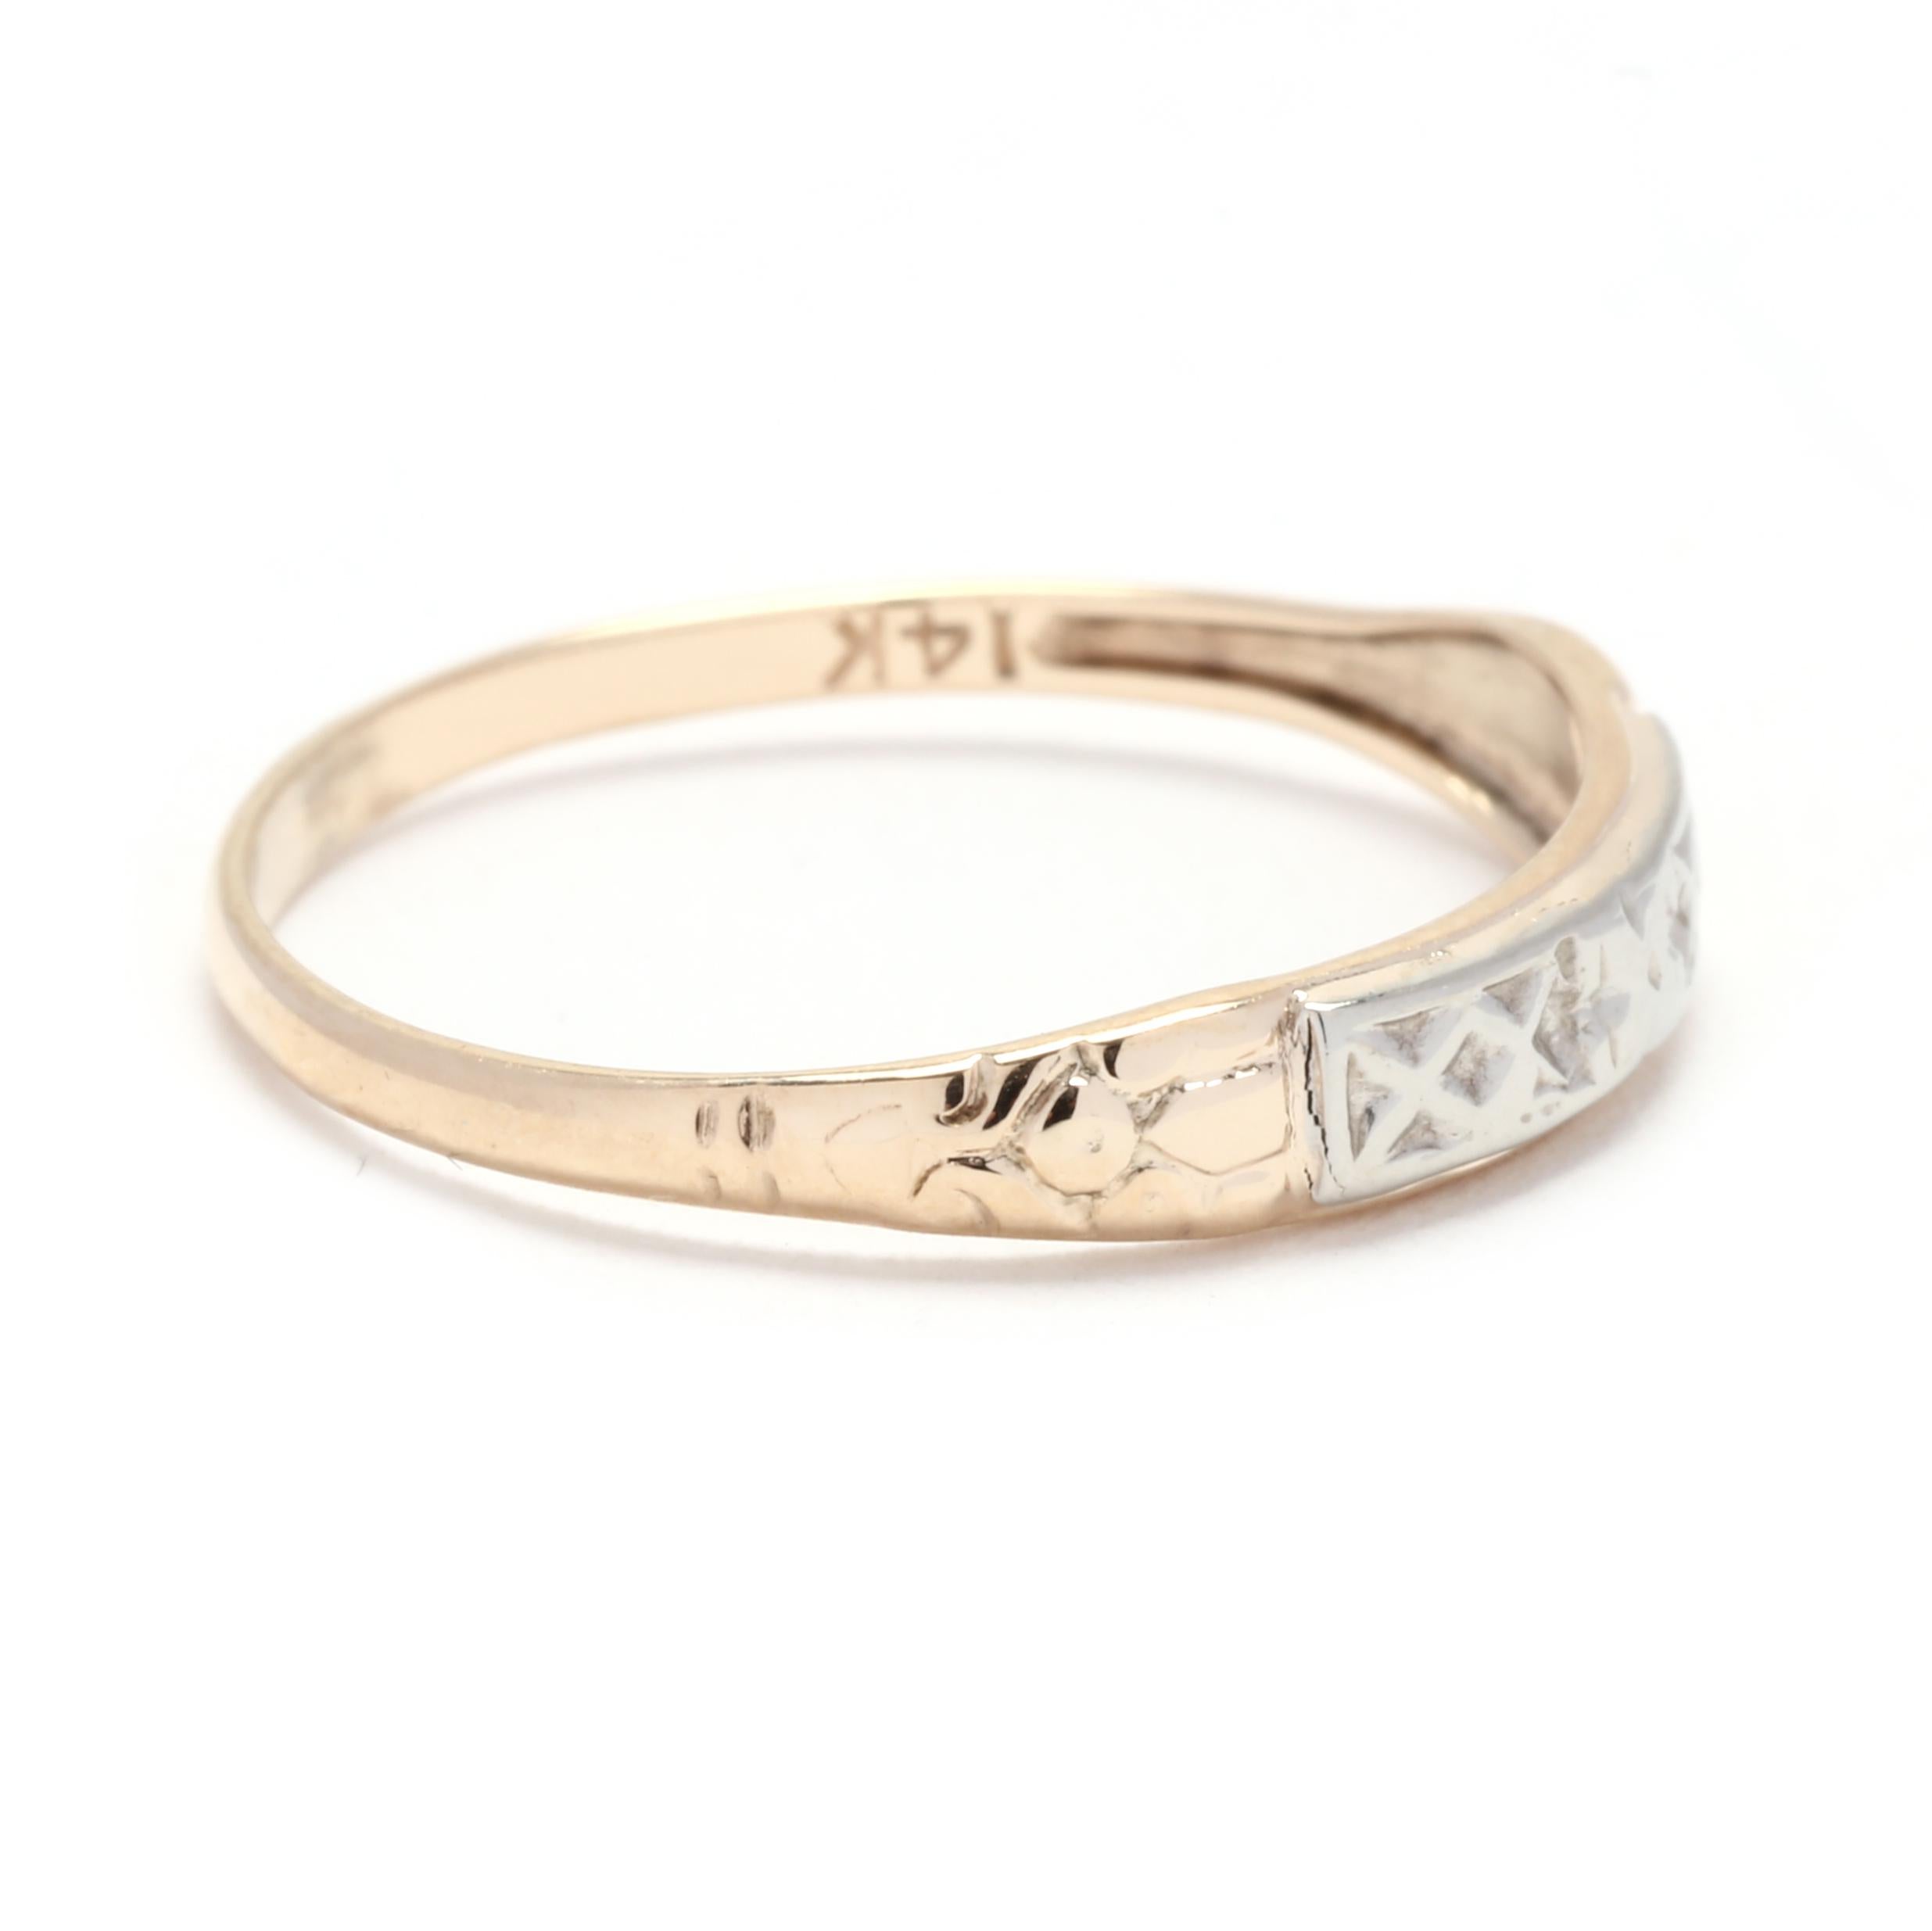 This Thin Engraved Wedding Band is the perfect vintage and retro inspired ring for your special day. Made with 14K yellow gold, this ring features delicate and intricate engravings, adding a romantic and stylish touch to the design.

Ring Size